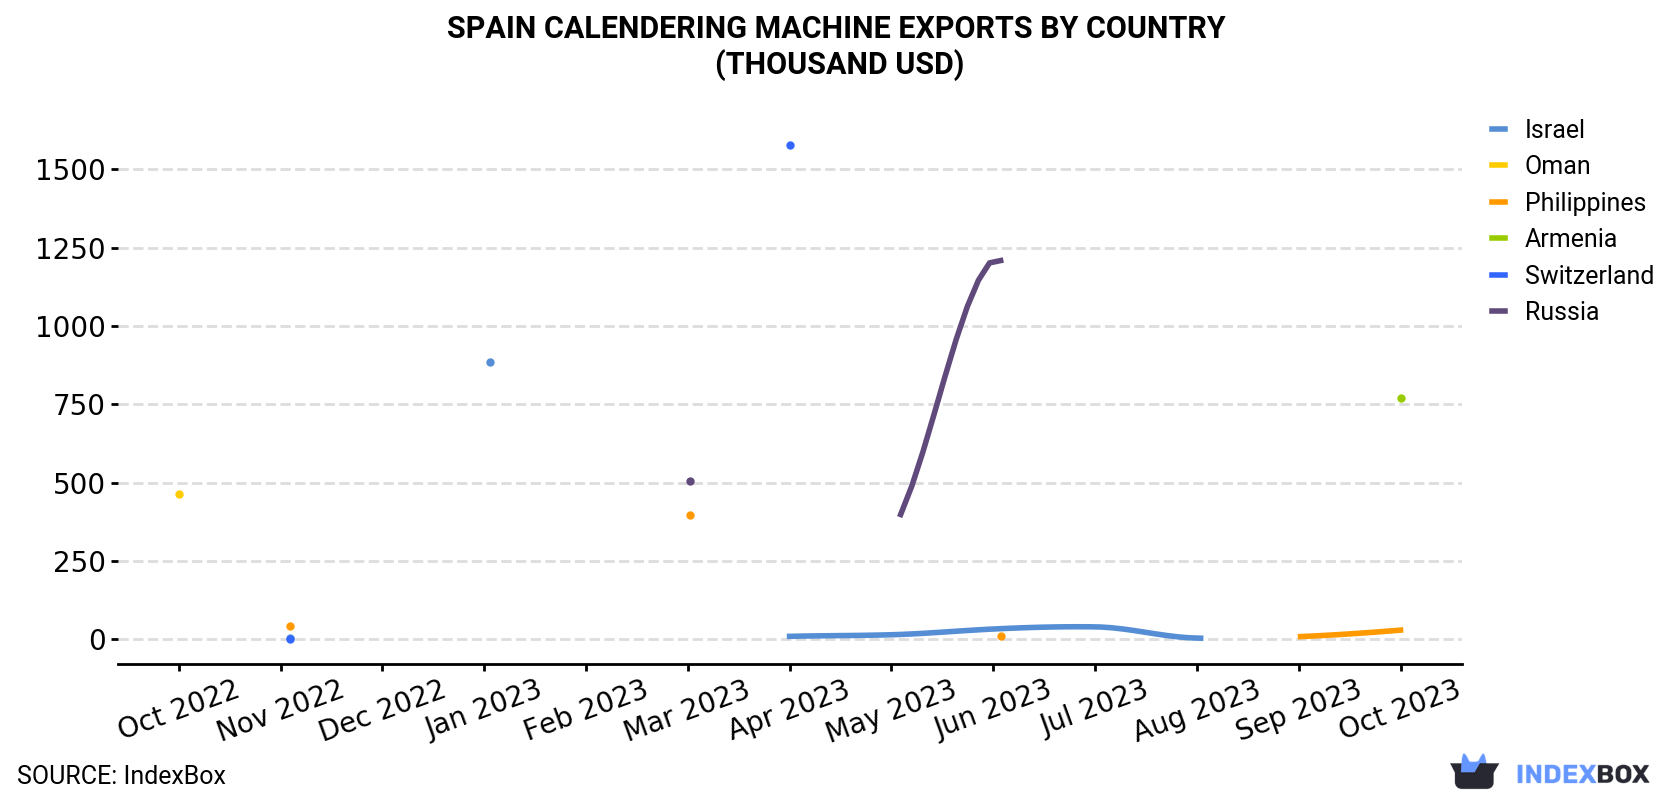 Spain Calendering Machine Exports By Country (Thousand USD)